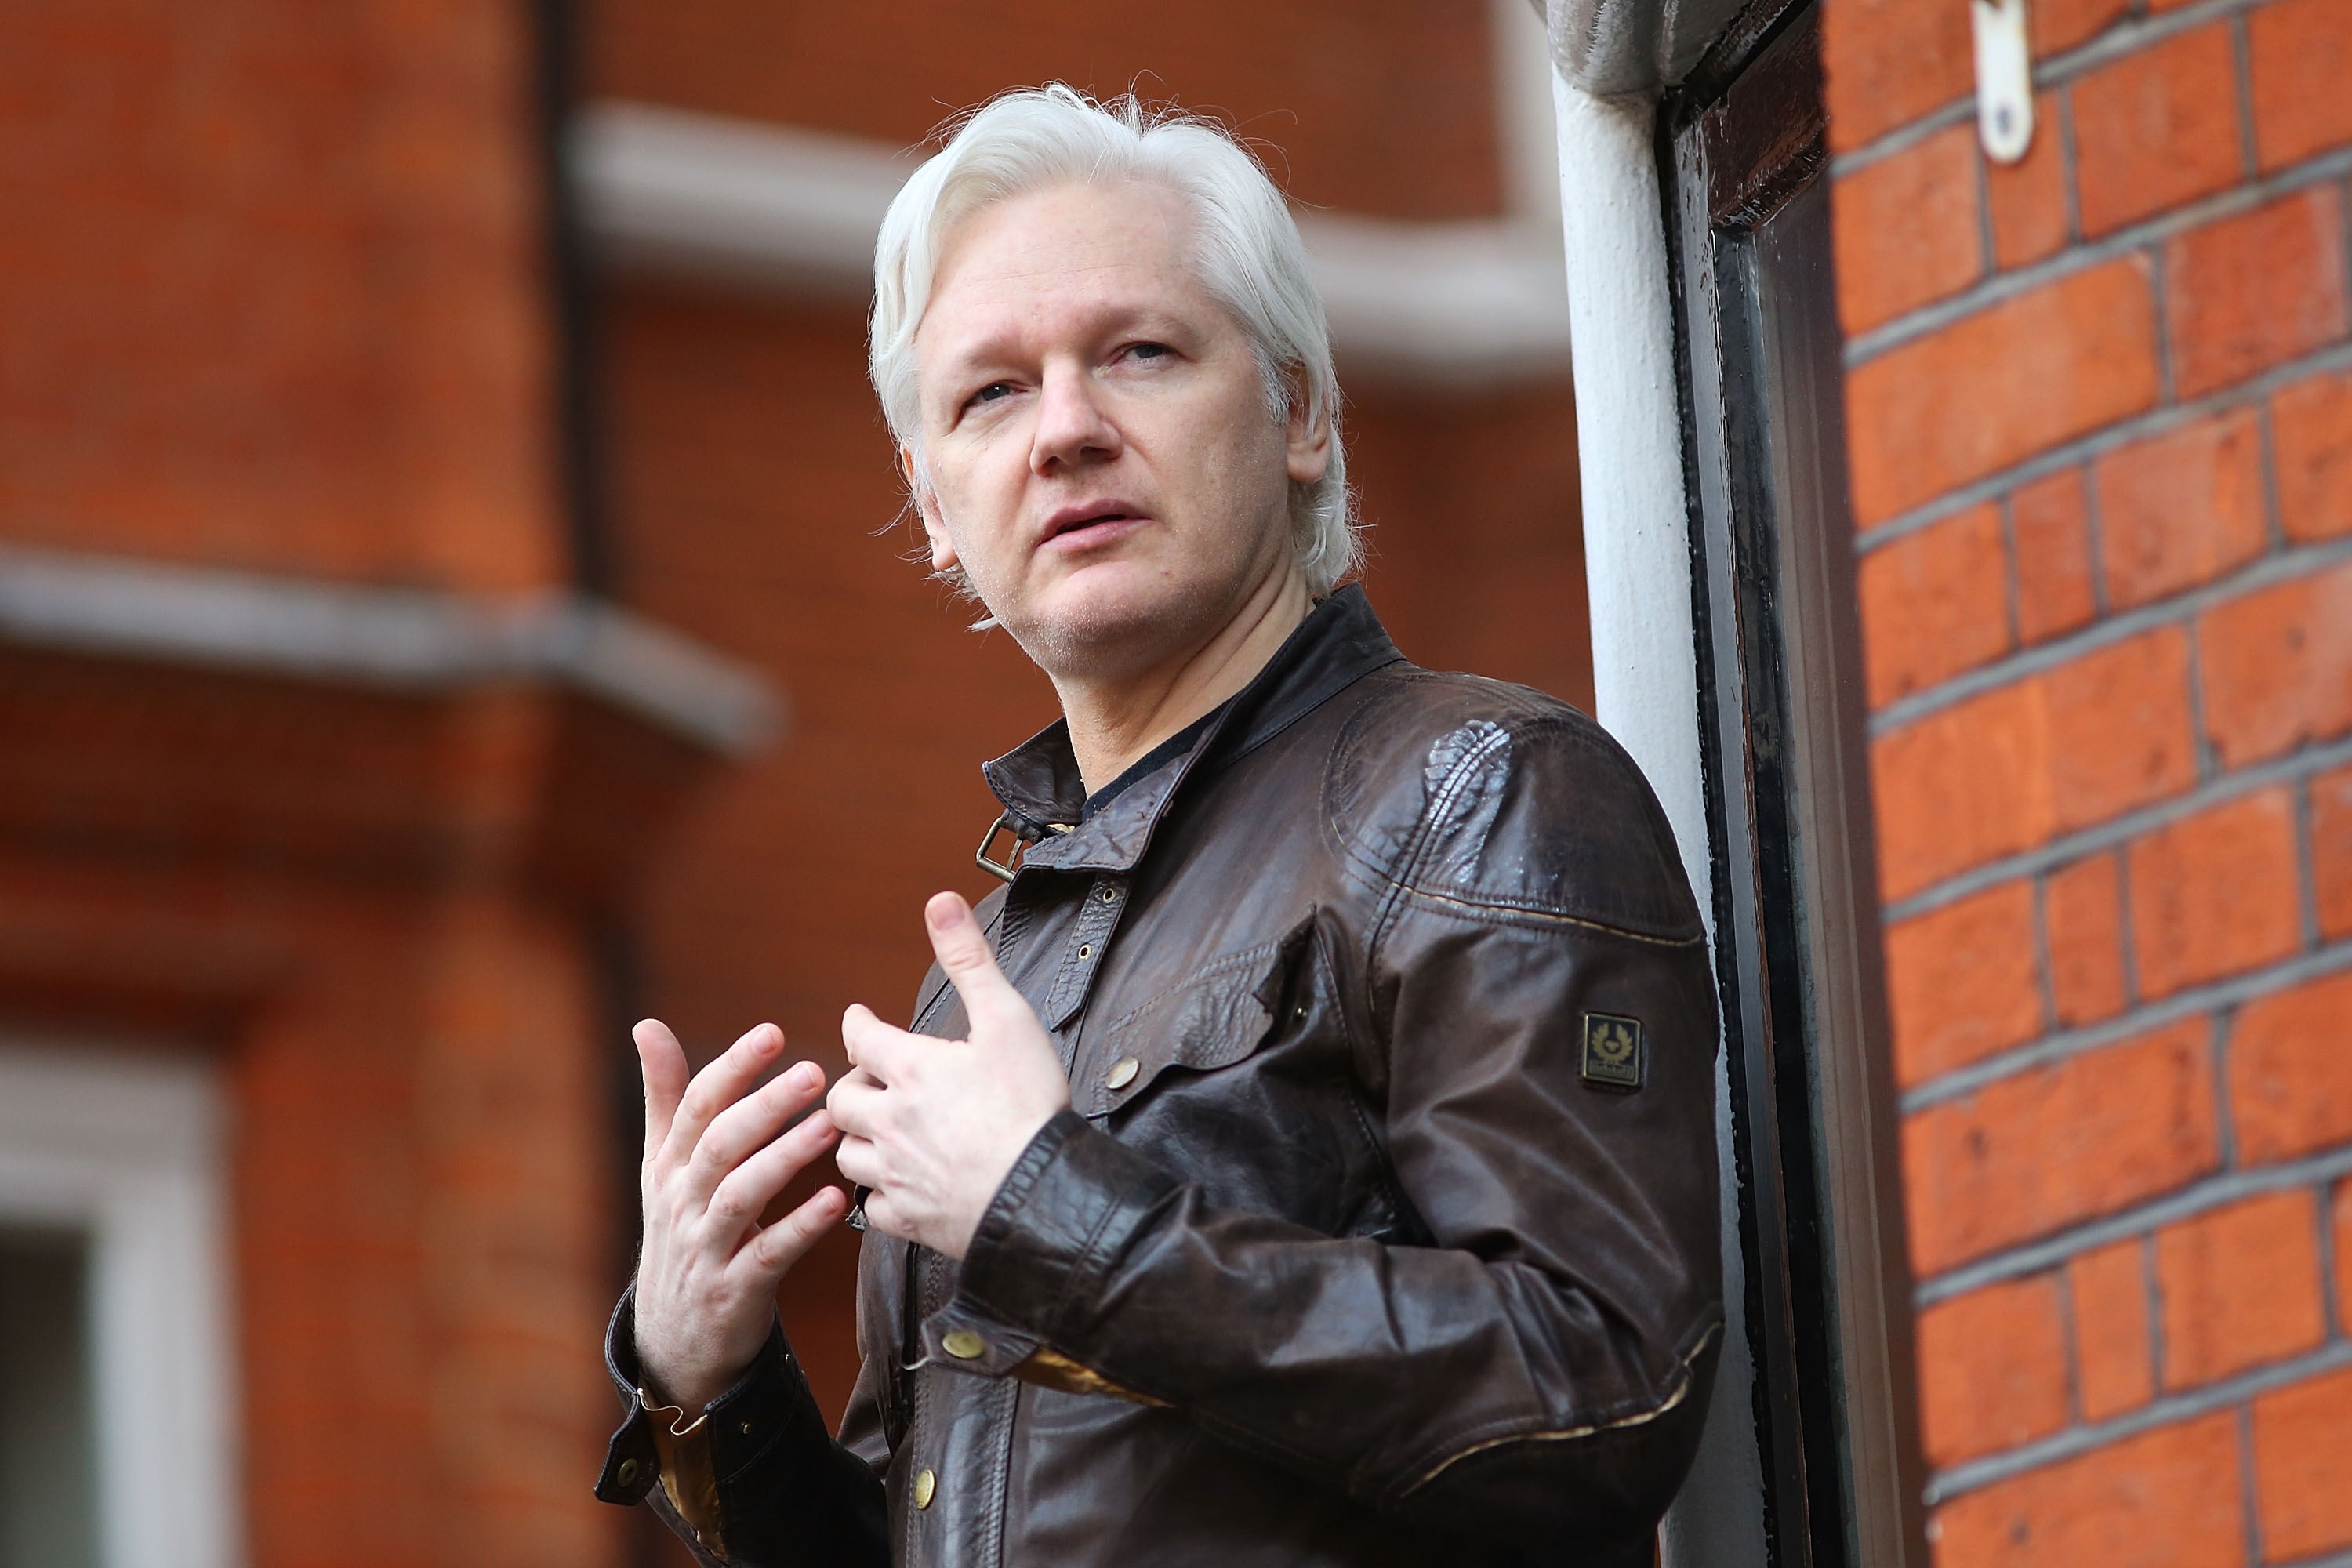 What Did Julian Assange Do? WikiLeaks Founder Faces 17 Espionage Charges